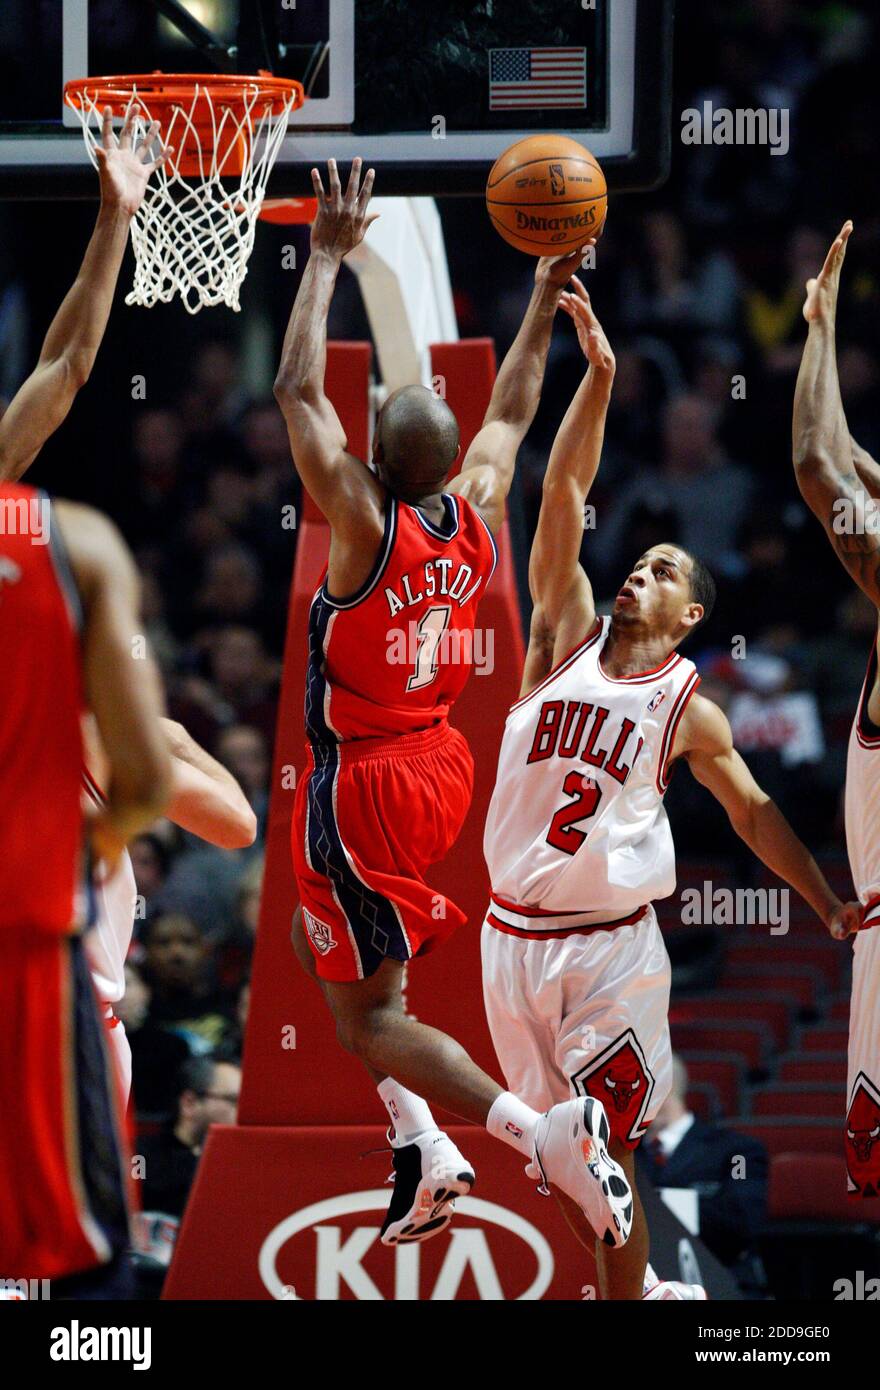 NO FILM, NO VIDEO, NO TV, NO DOCUMENTARY - New Jersey Nets guard Rafer Alston drives to the hoop as Chicago Bulls guard Jannero Pargo defends in the first half at the United Center in Chicago, IL, USA on December 8, 2009. Photo by Chris Sweda/Chicago Tribune/MCT/Cameleon/ABACAPRESS.COM Stock Photo